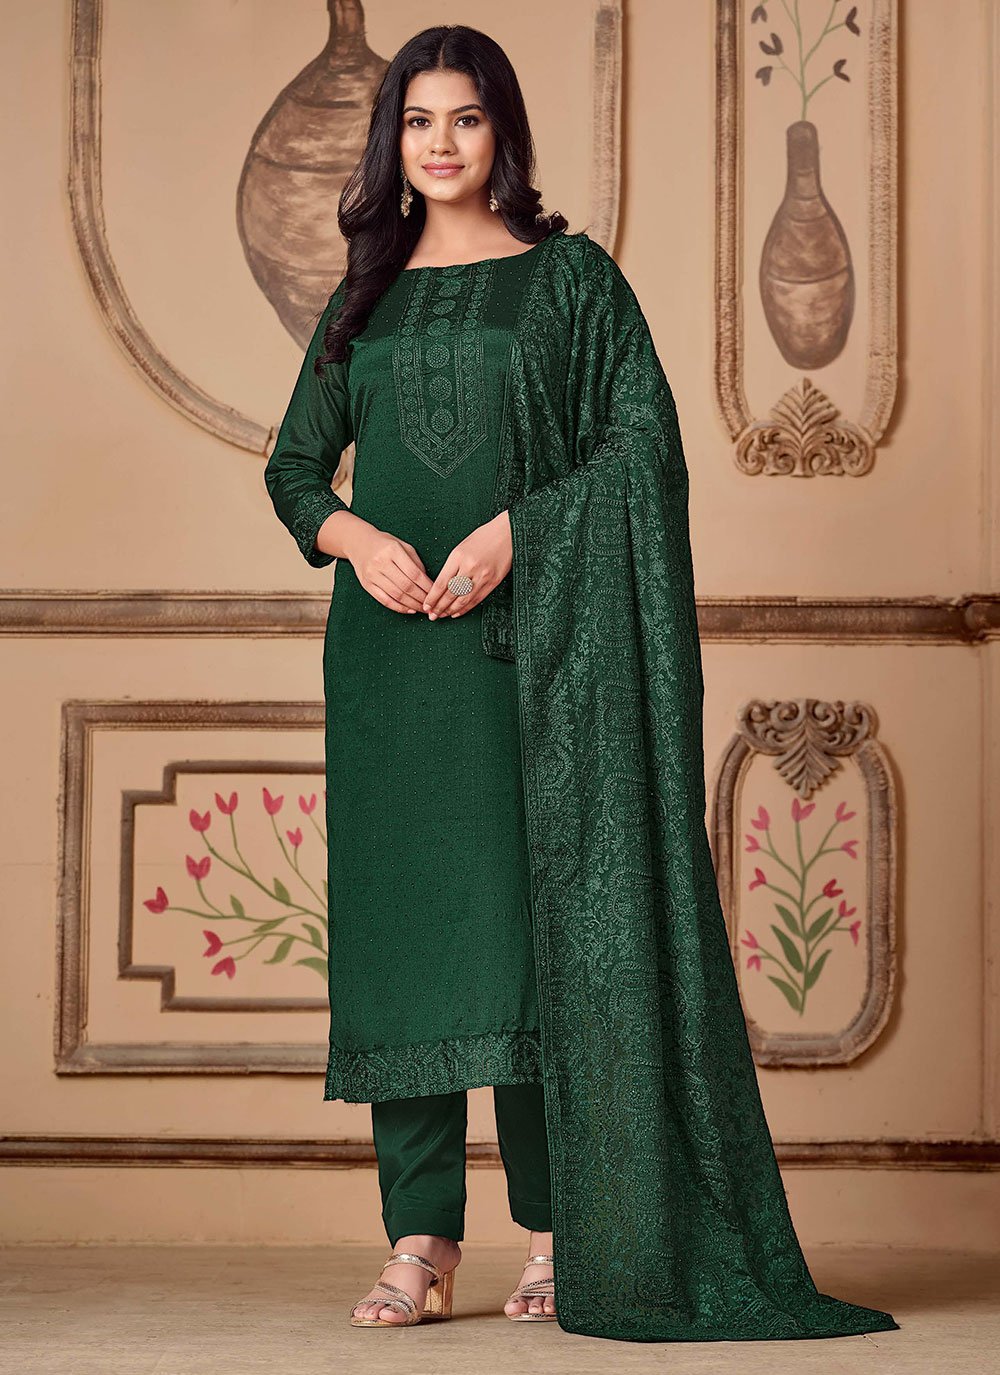 Green Color Georgette With Embroidery Work Salwar Suit – Joshindia